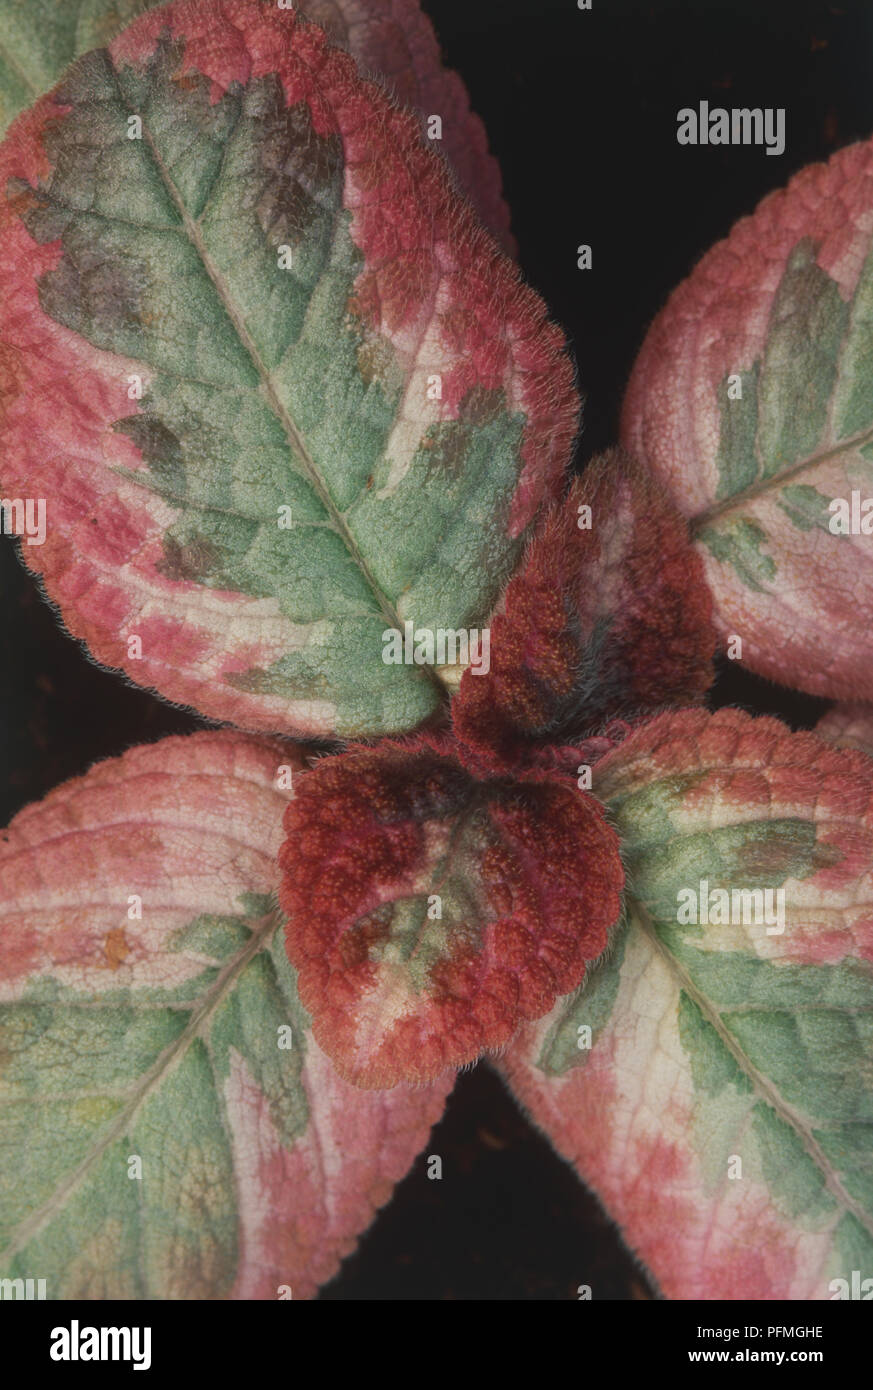 Episcia 'Cleopatra, variegated, red and green leaves of tropical plant Stock Photo